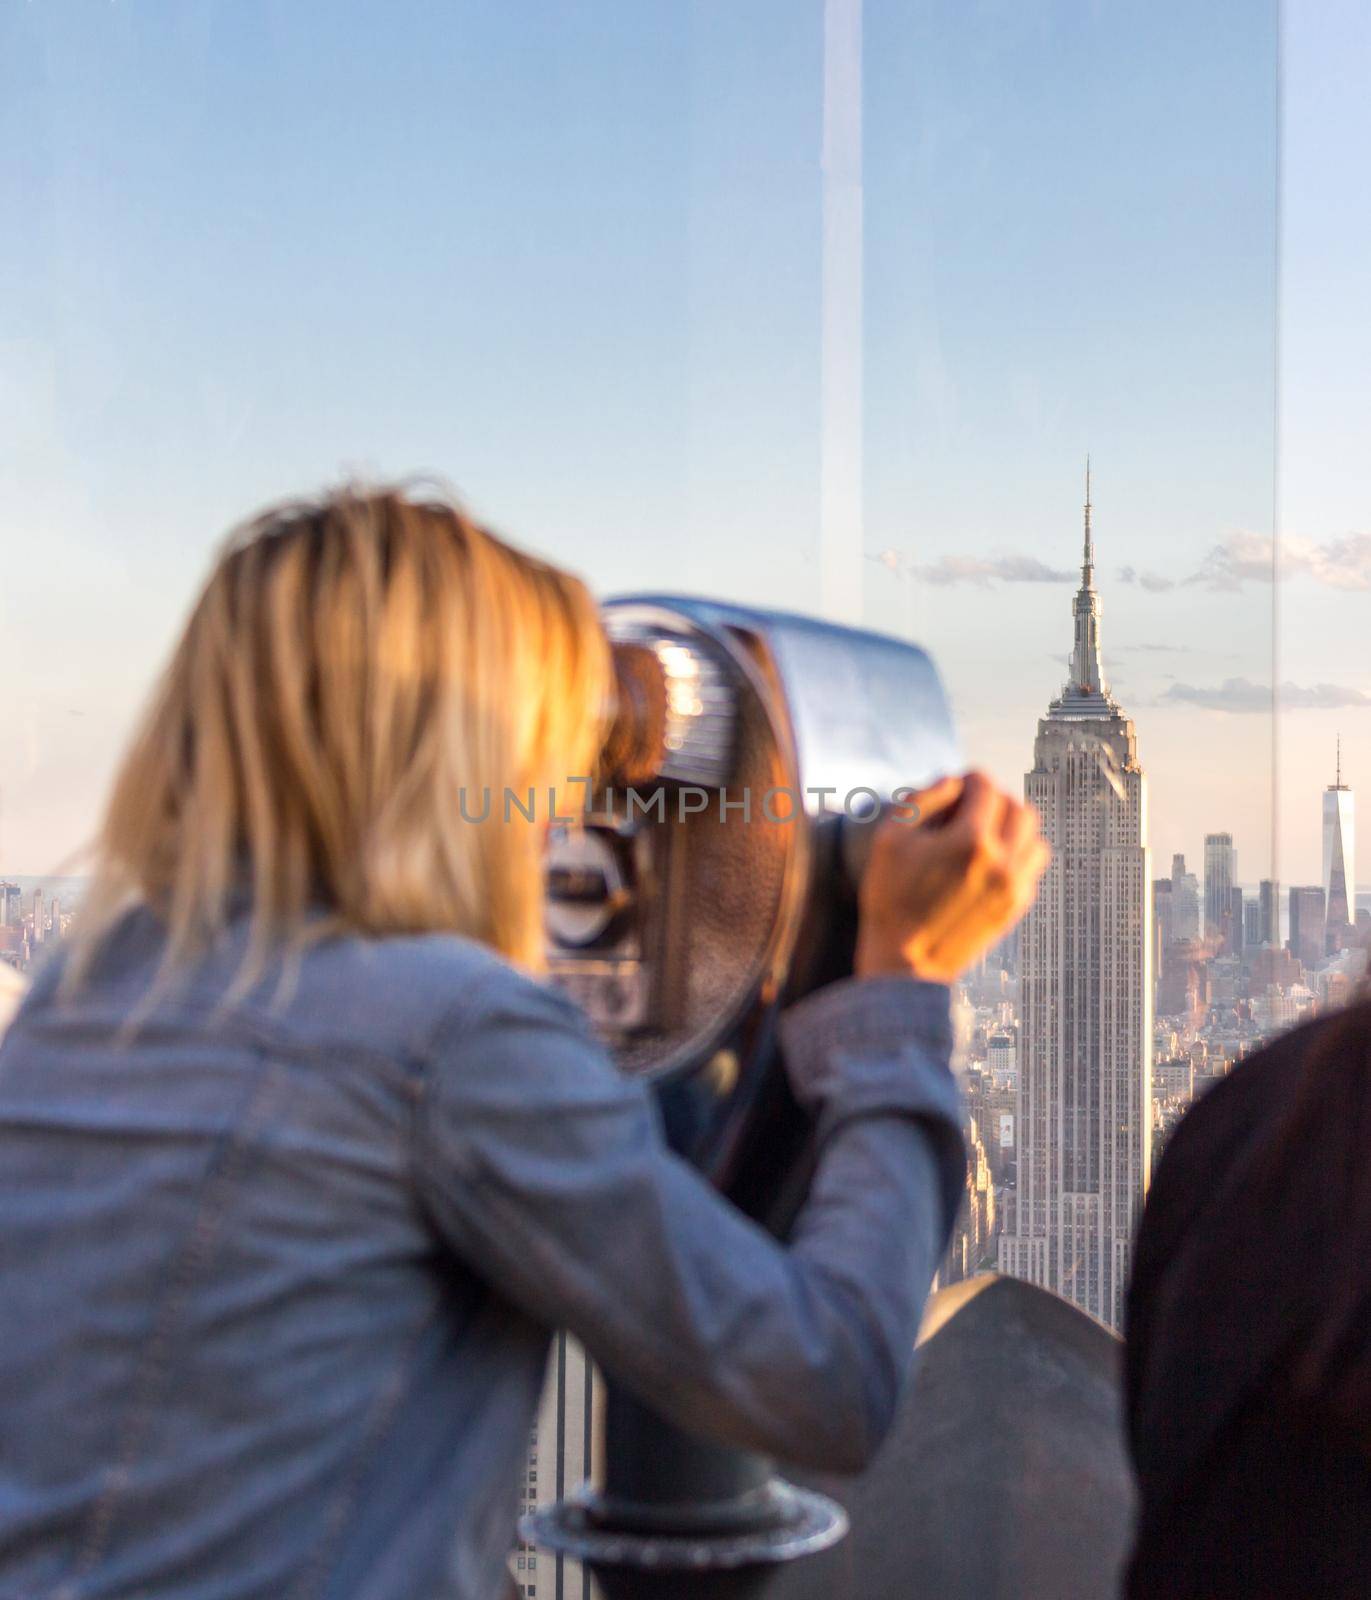 New york, USA - May 17, 2019: Rear View of Woman Peering Through Binocular View Finder at New York City Skyline from Top of the Rock